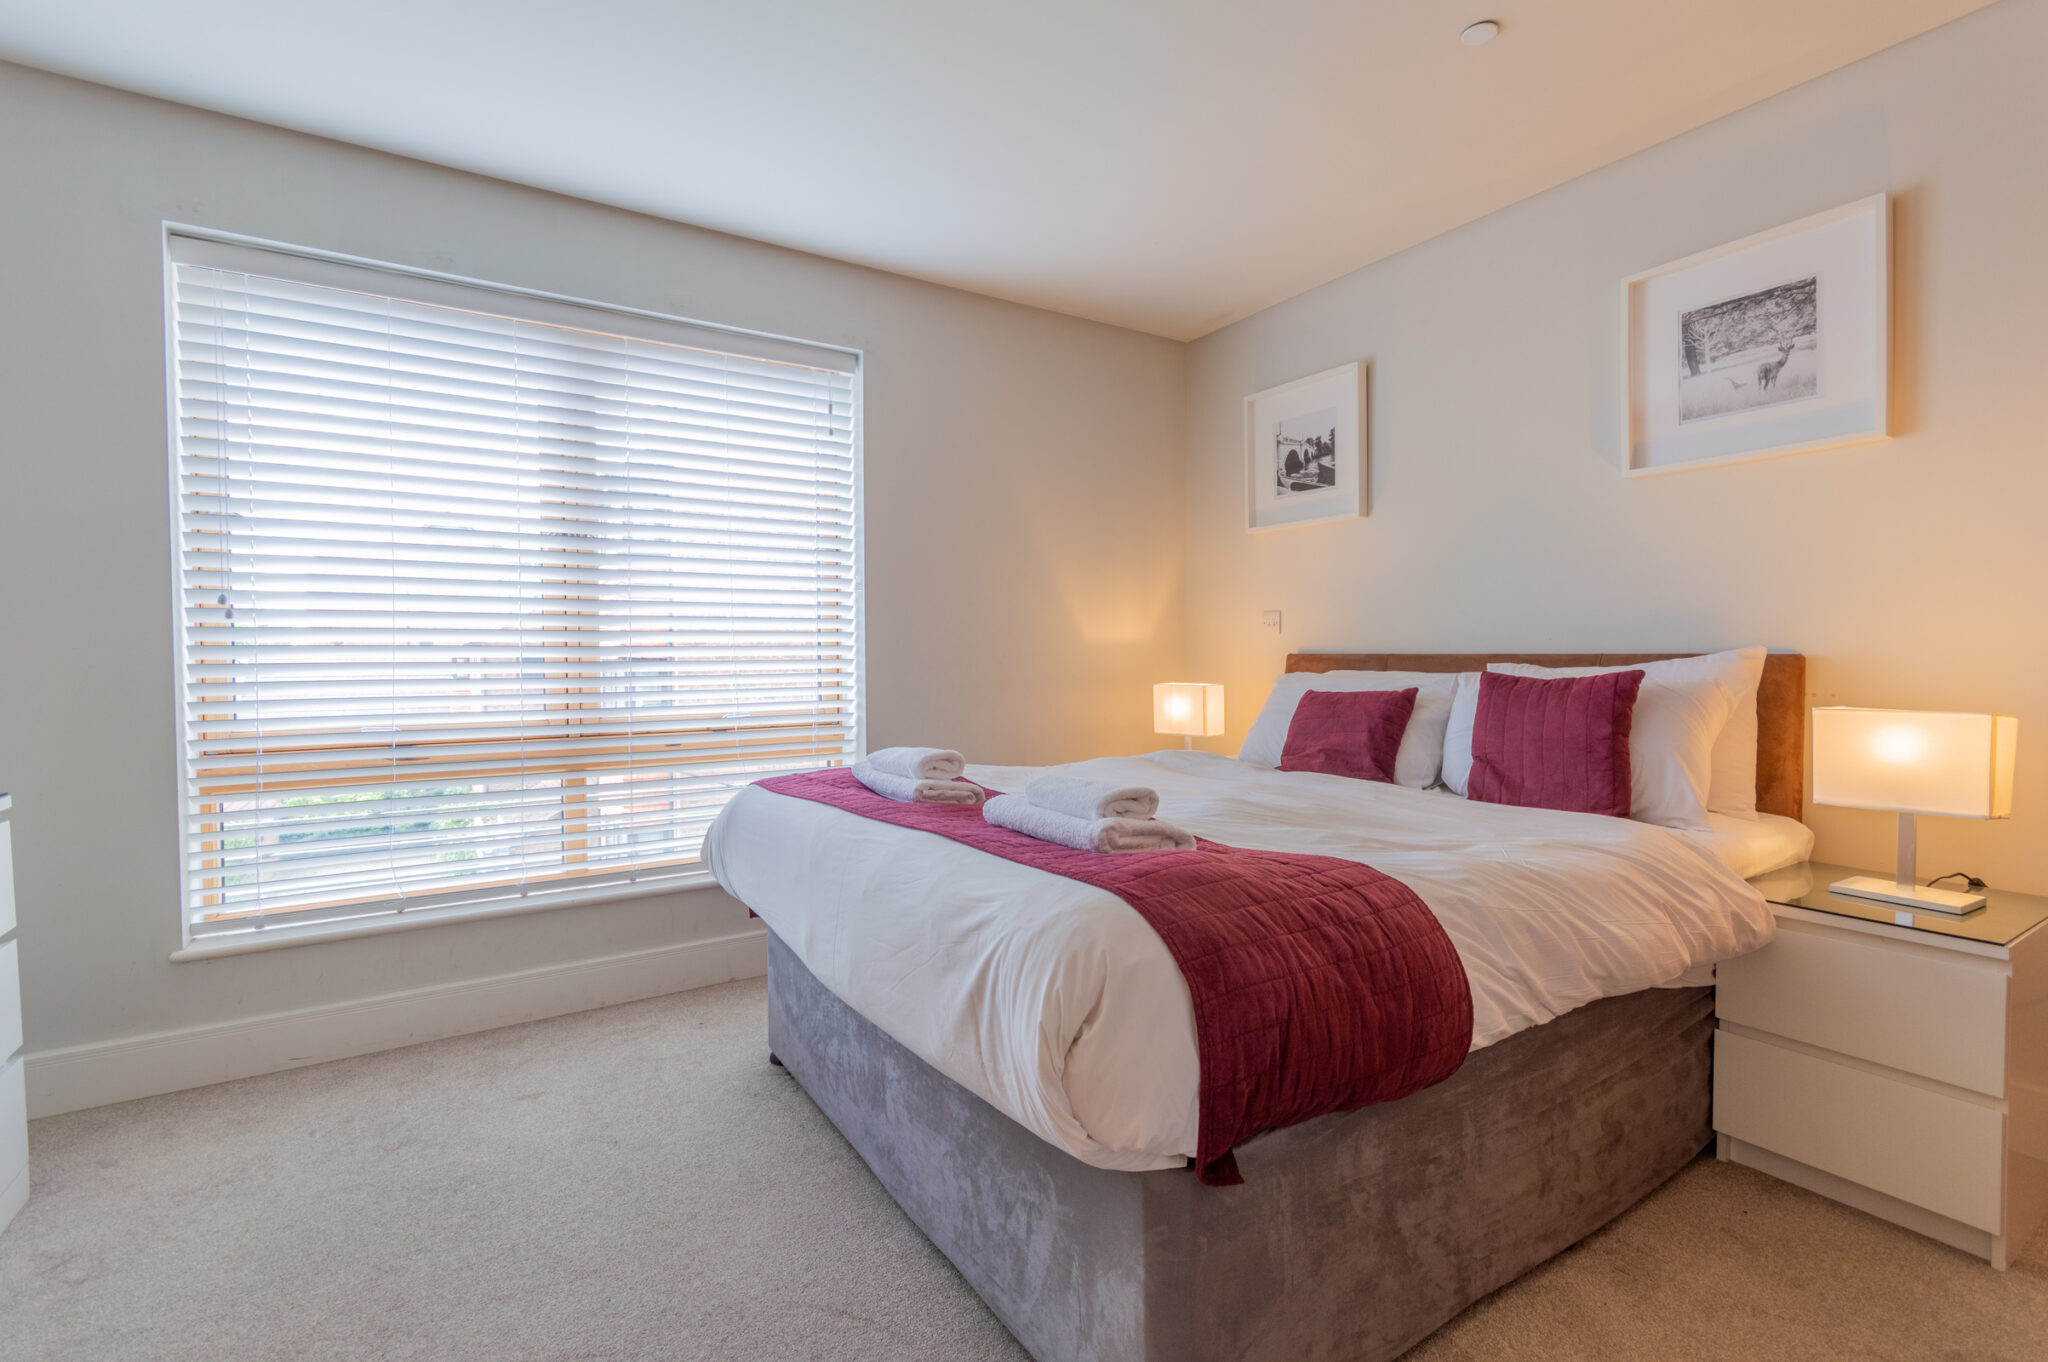 Marina Place Apartments - West London Serviced Apartments - London | Urban Stay